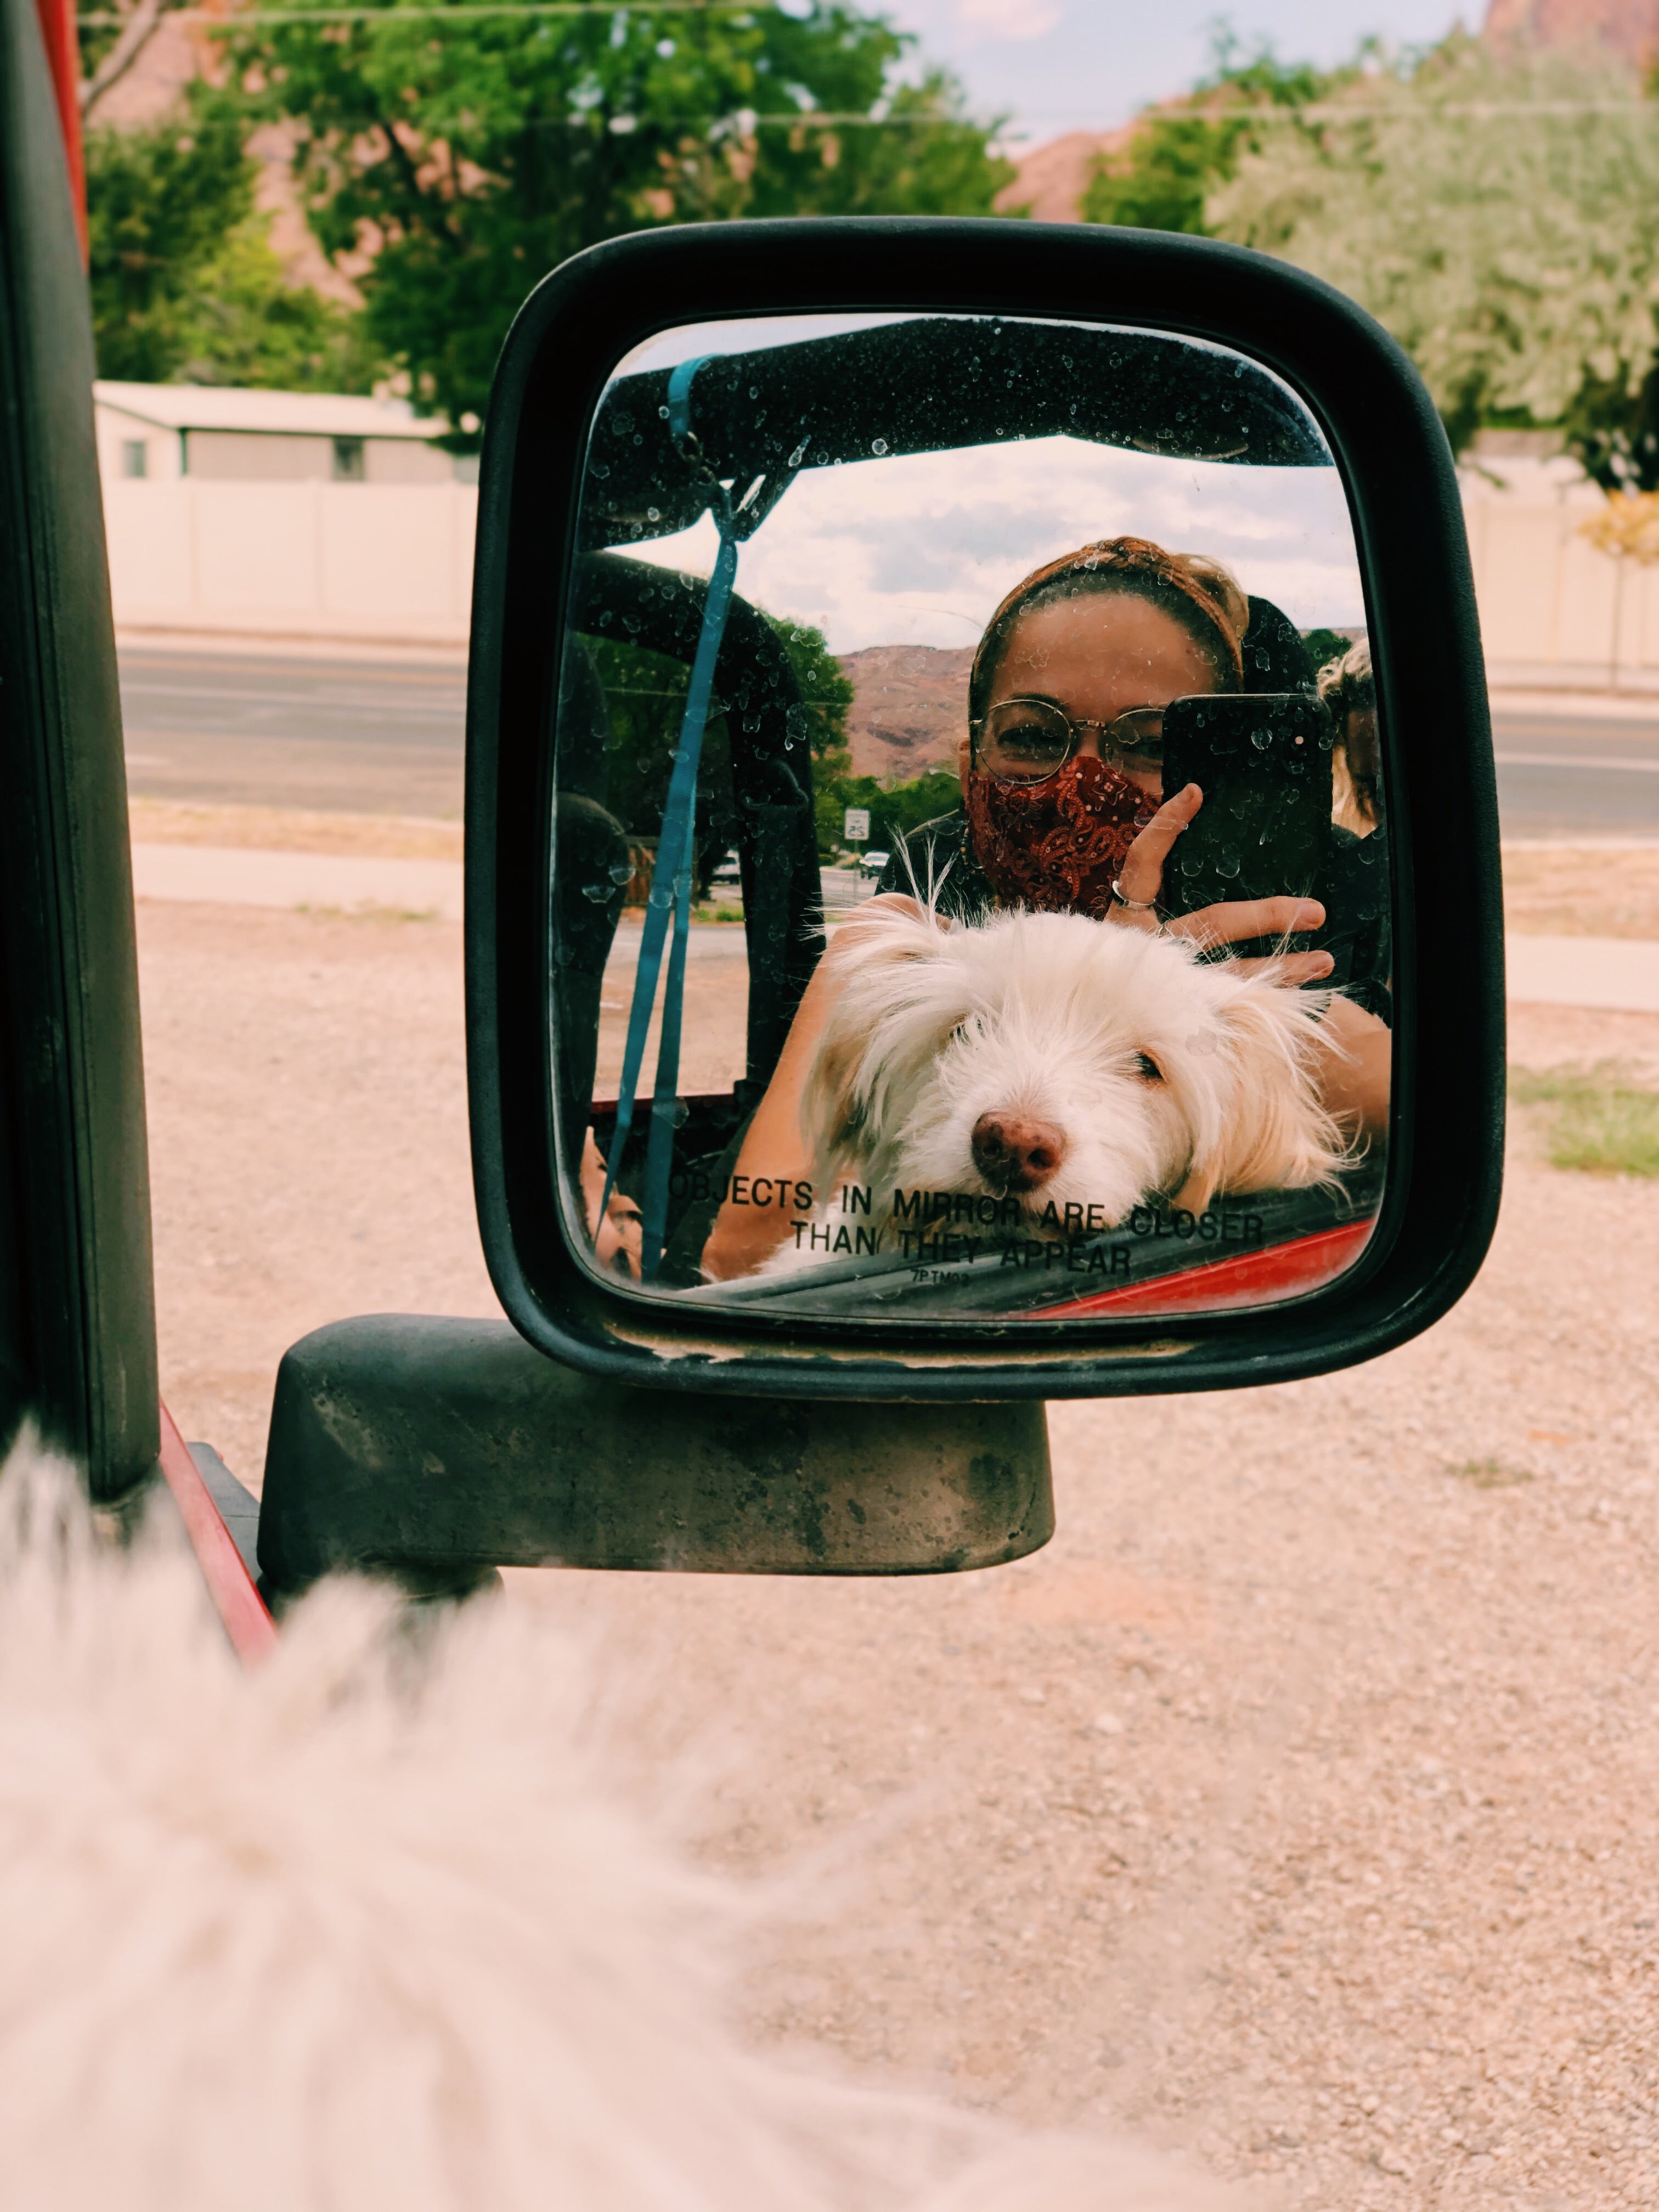 Woman and dog in the side mirror of a car